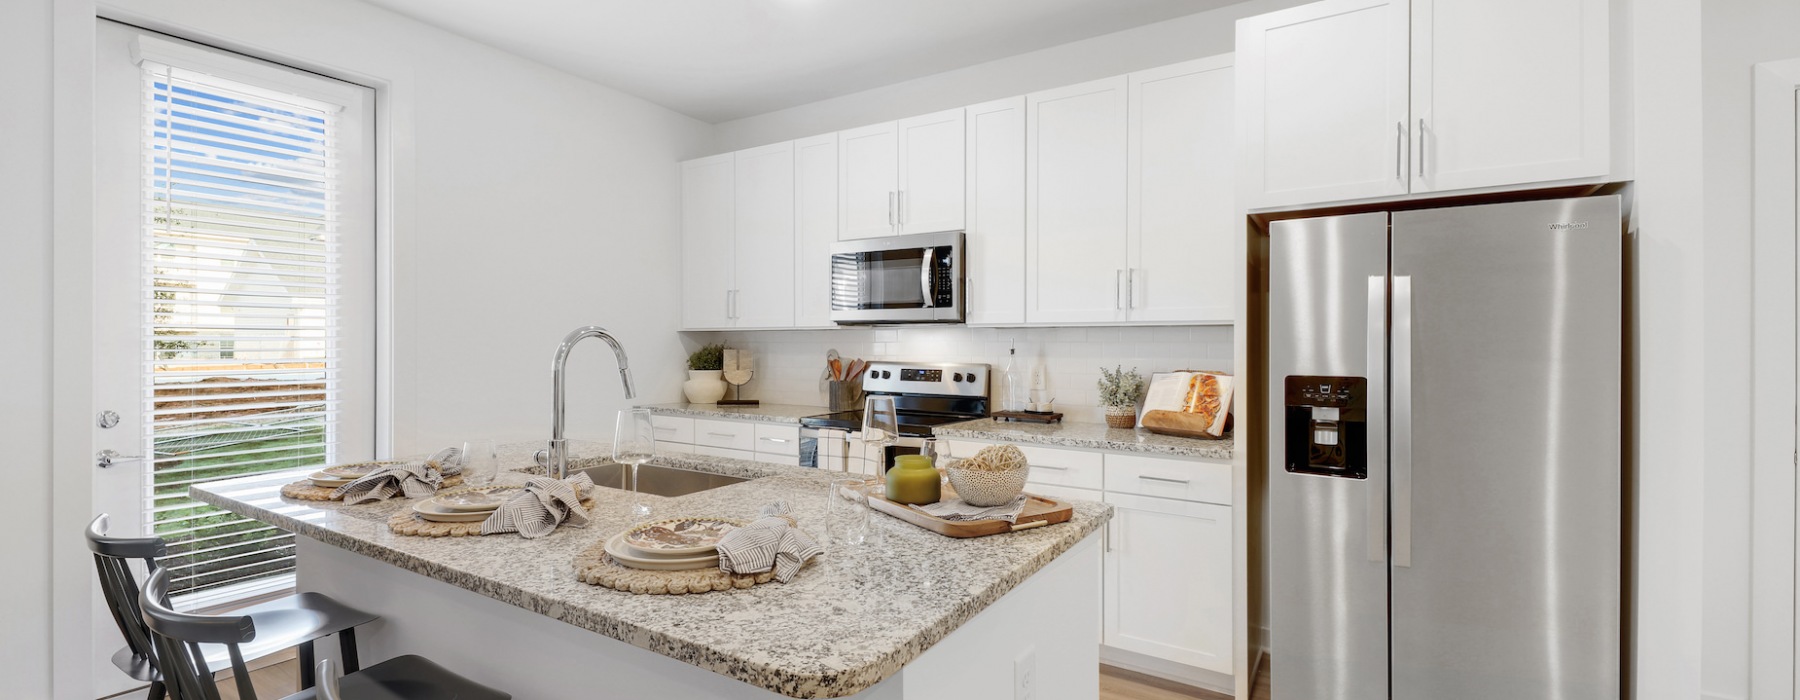 Stainless steel appliances in apartment kitchens at The Finch